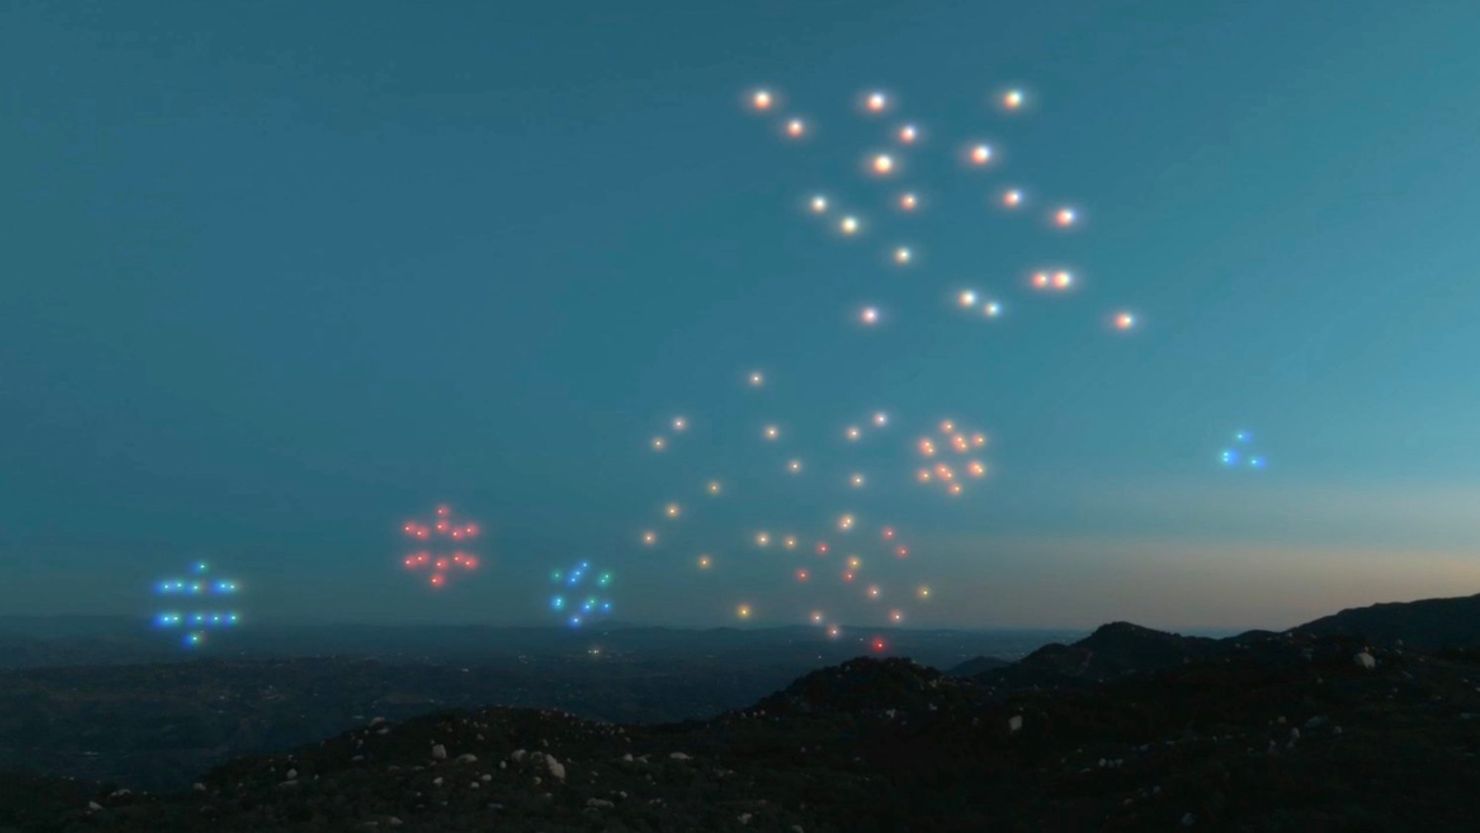 A light show from Drone Studios shows the aerial decorations displayed by the machines' colorful pixels.